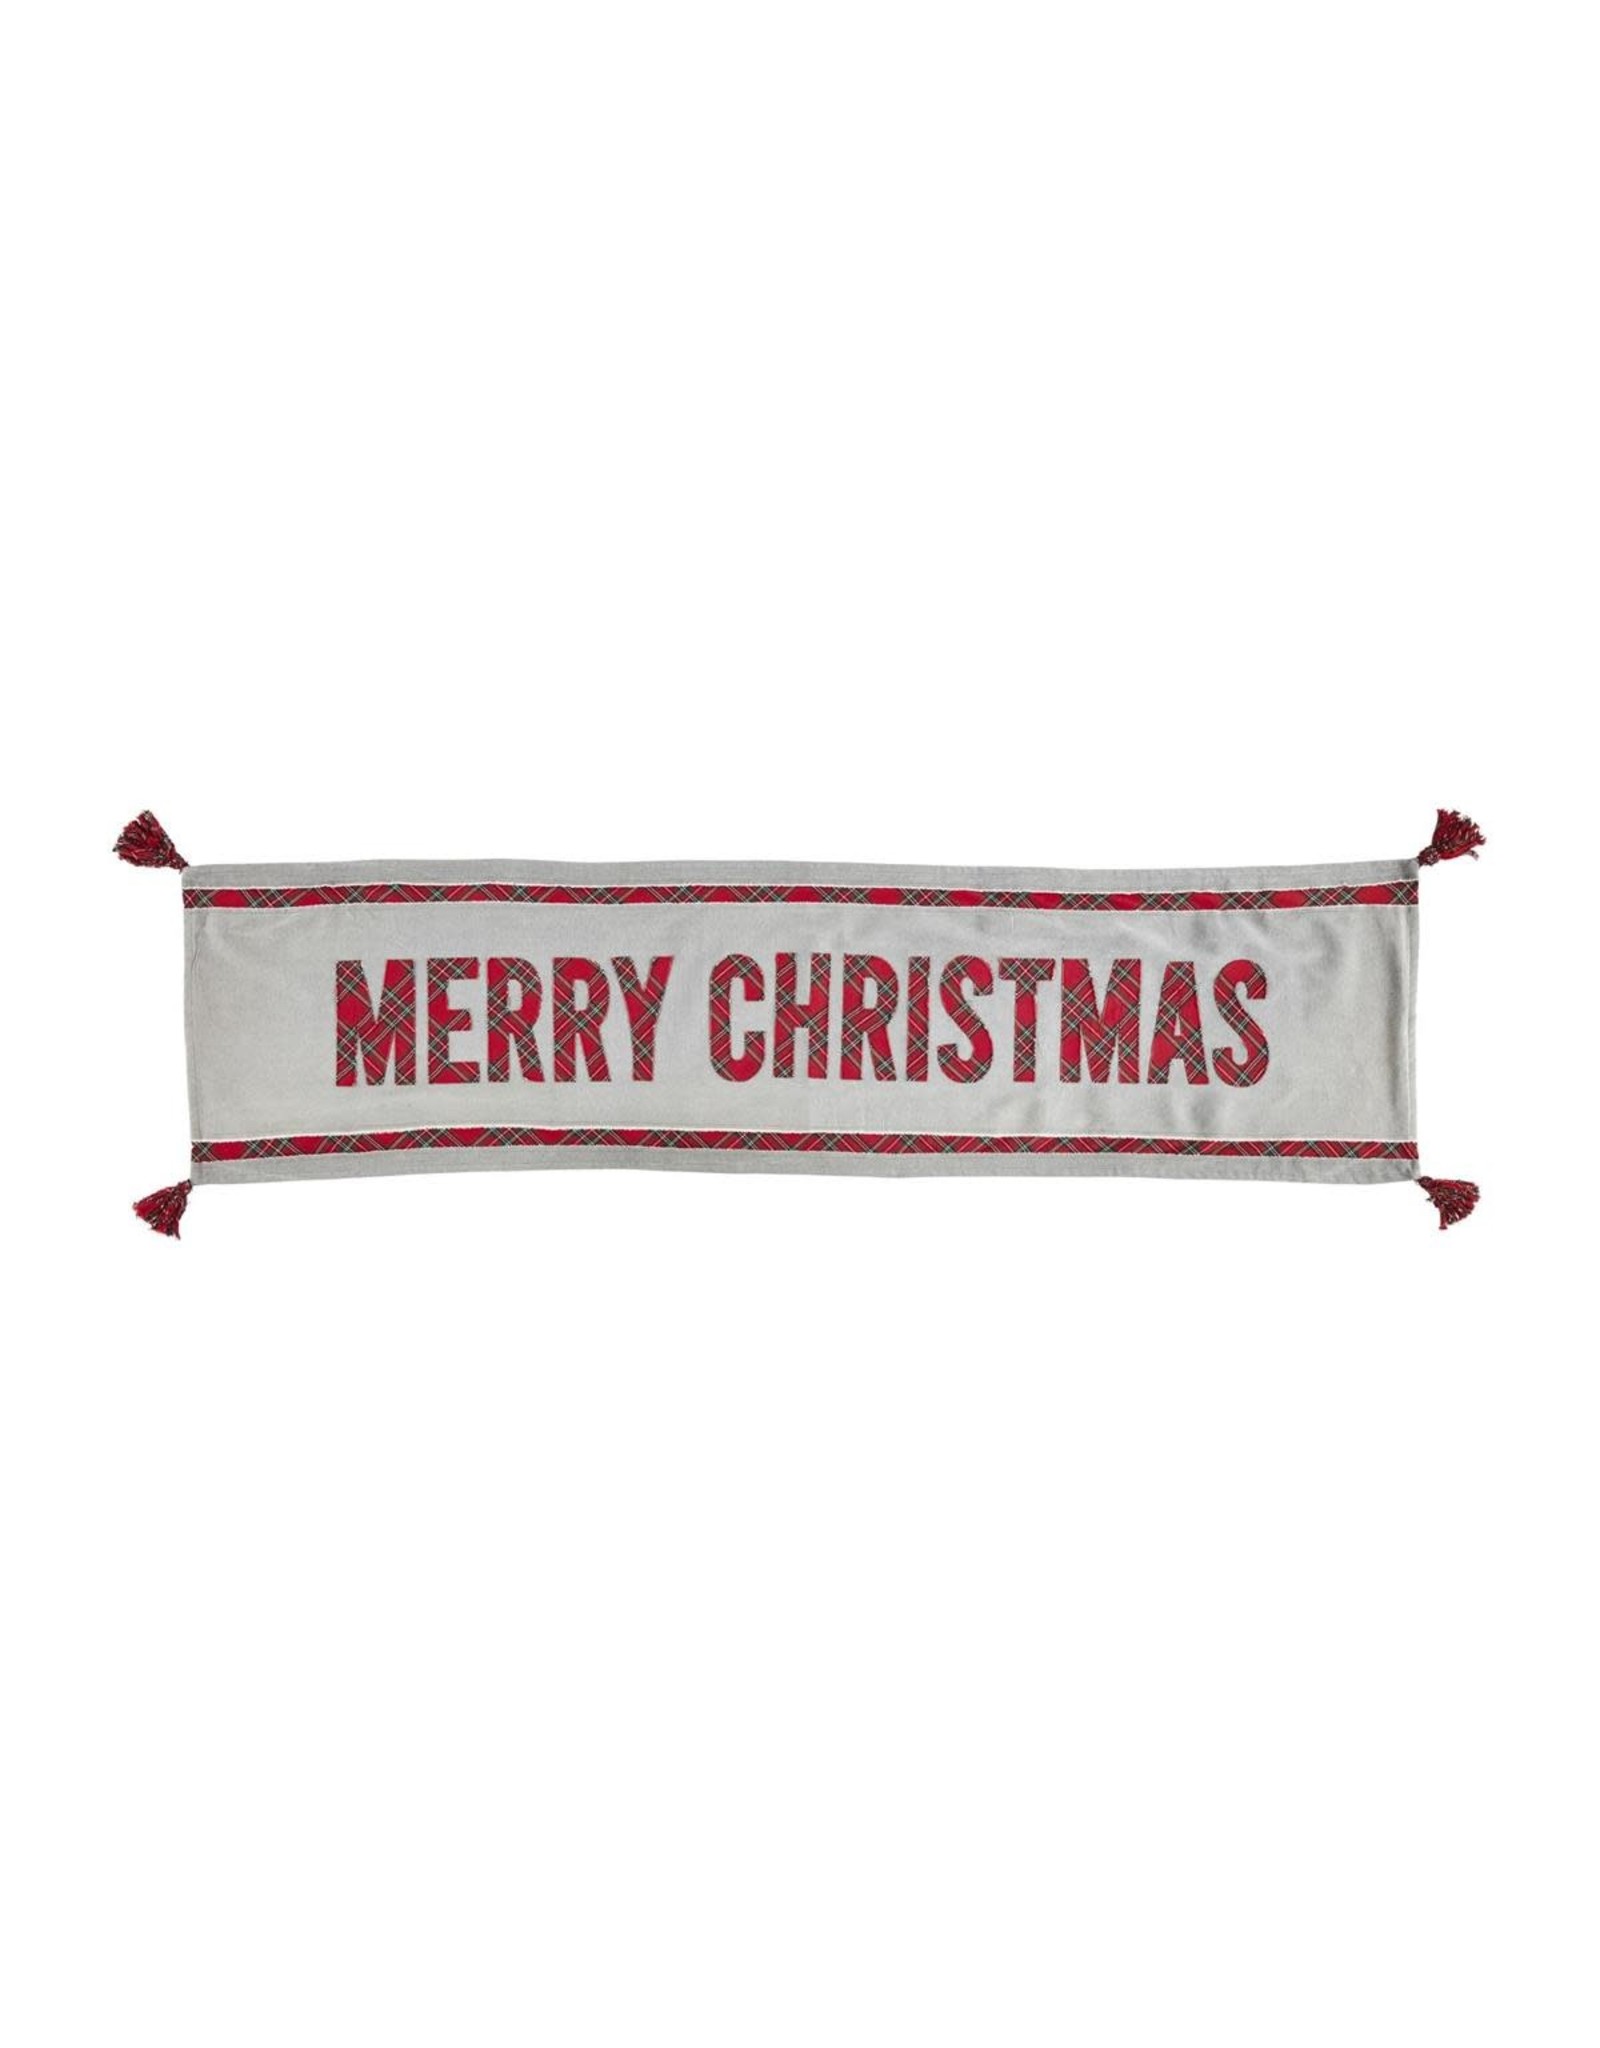 Mud Pie Christmas Table Runner Reversible W Merry Christmas Applique